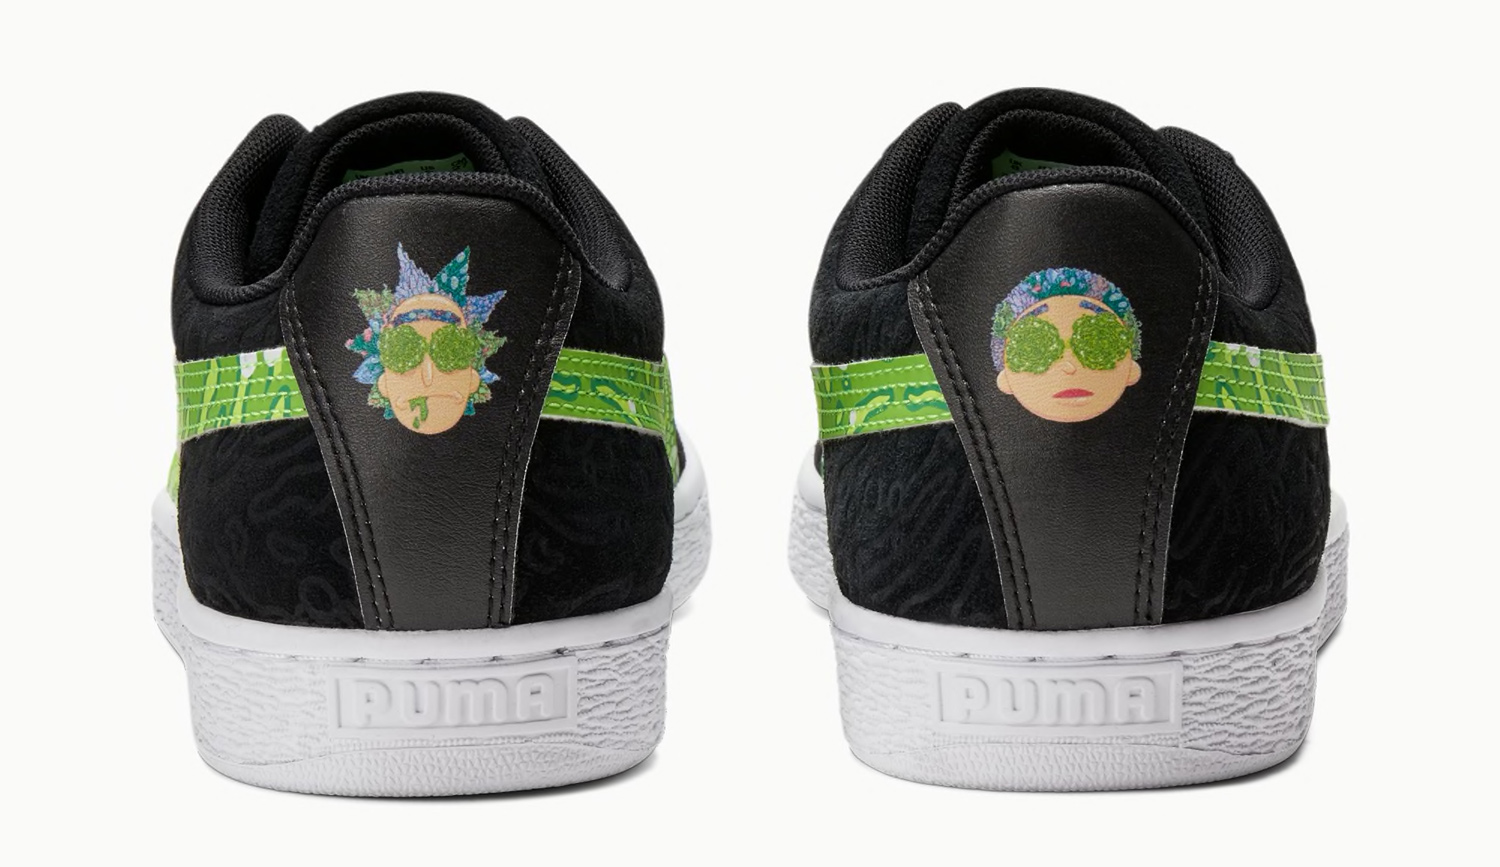 Rick and Morty Puma Suede Shirts and Clothing